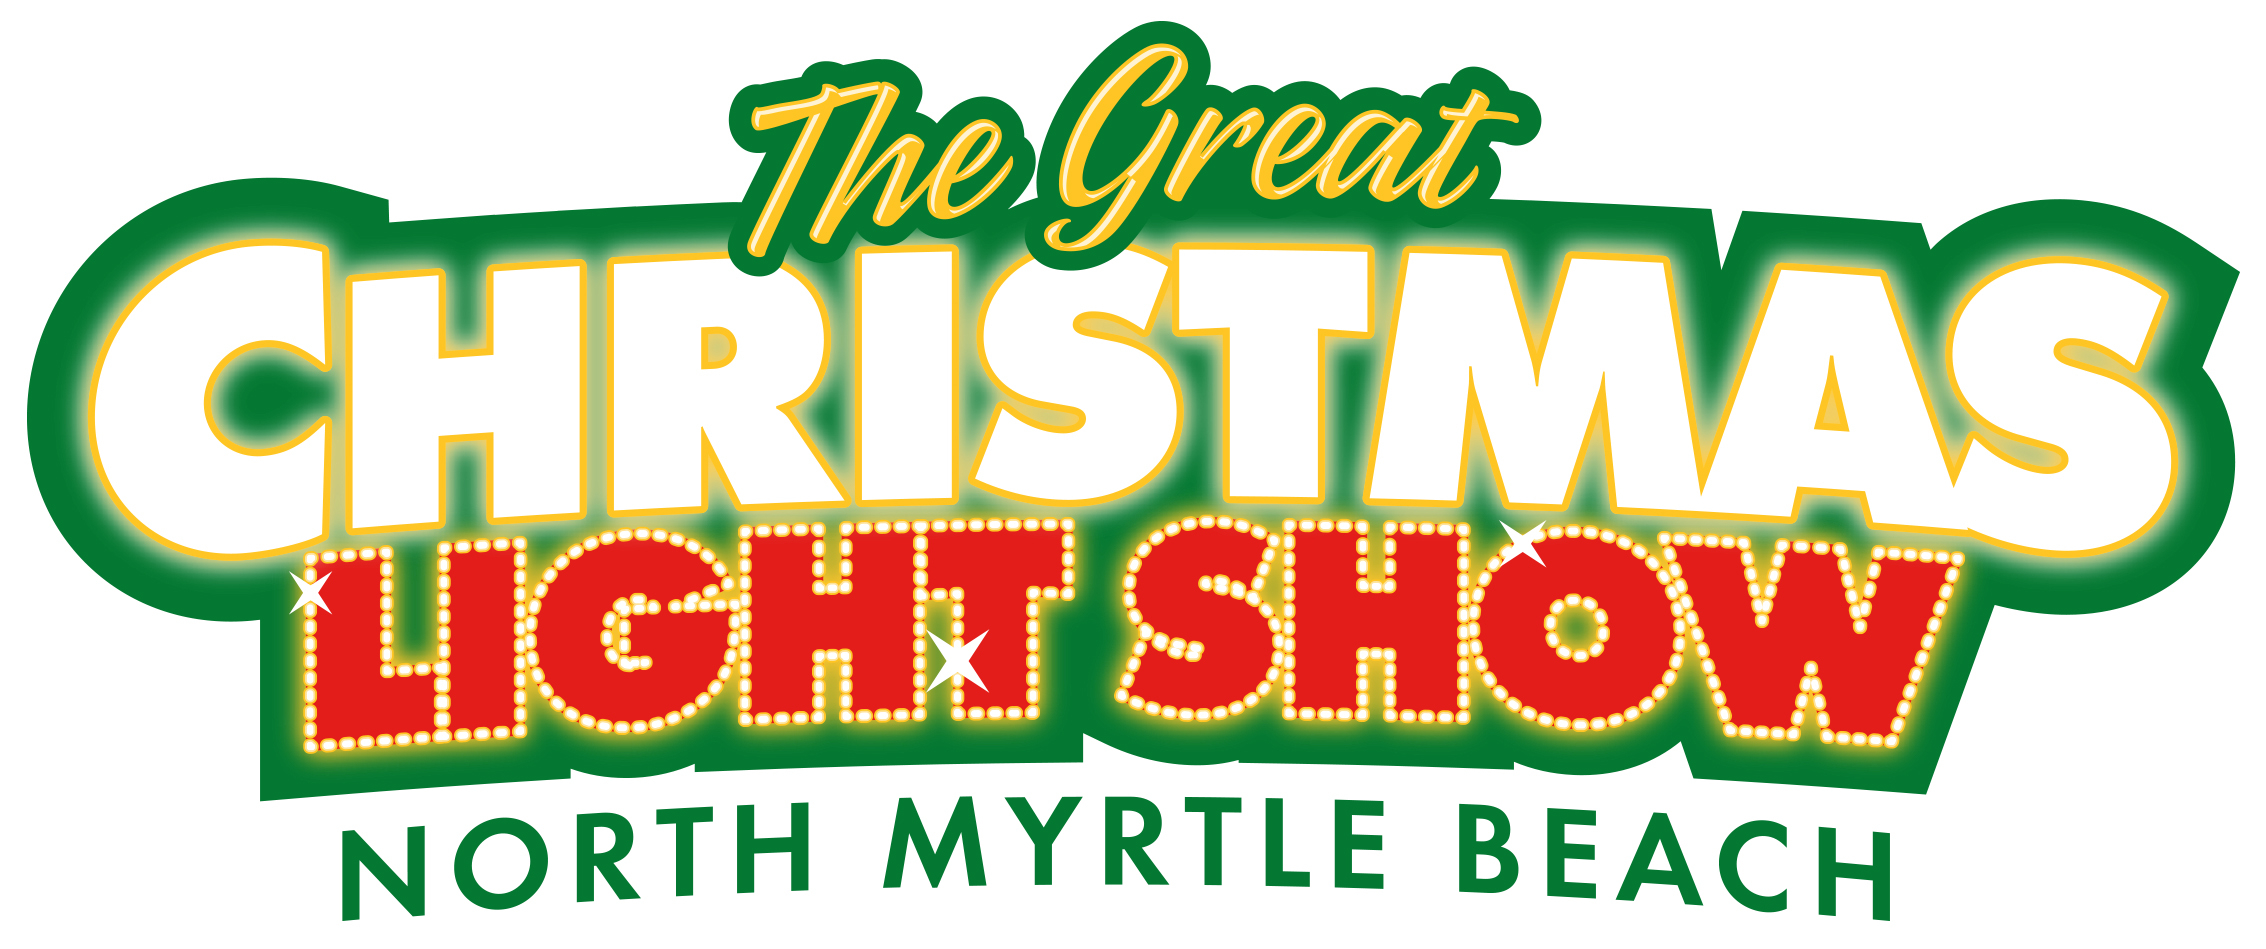 The Great Christmas Light Show North Myrtle Beach Park Sports throughout measurements 2266 X 949